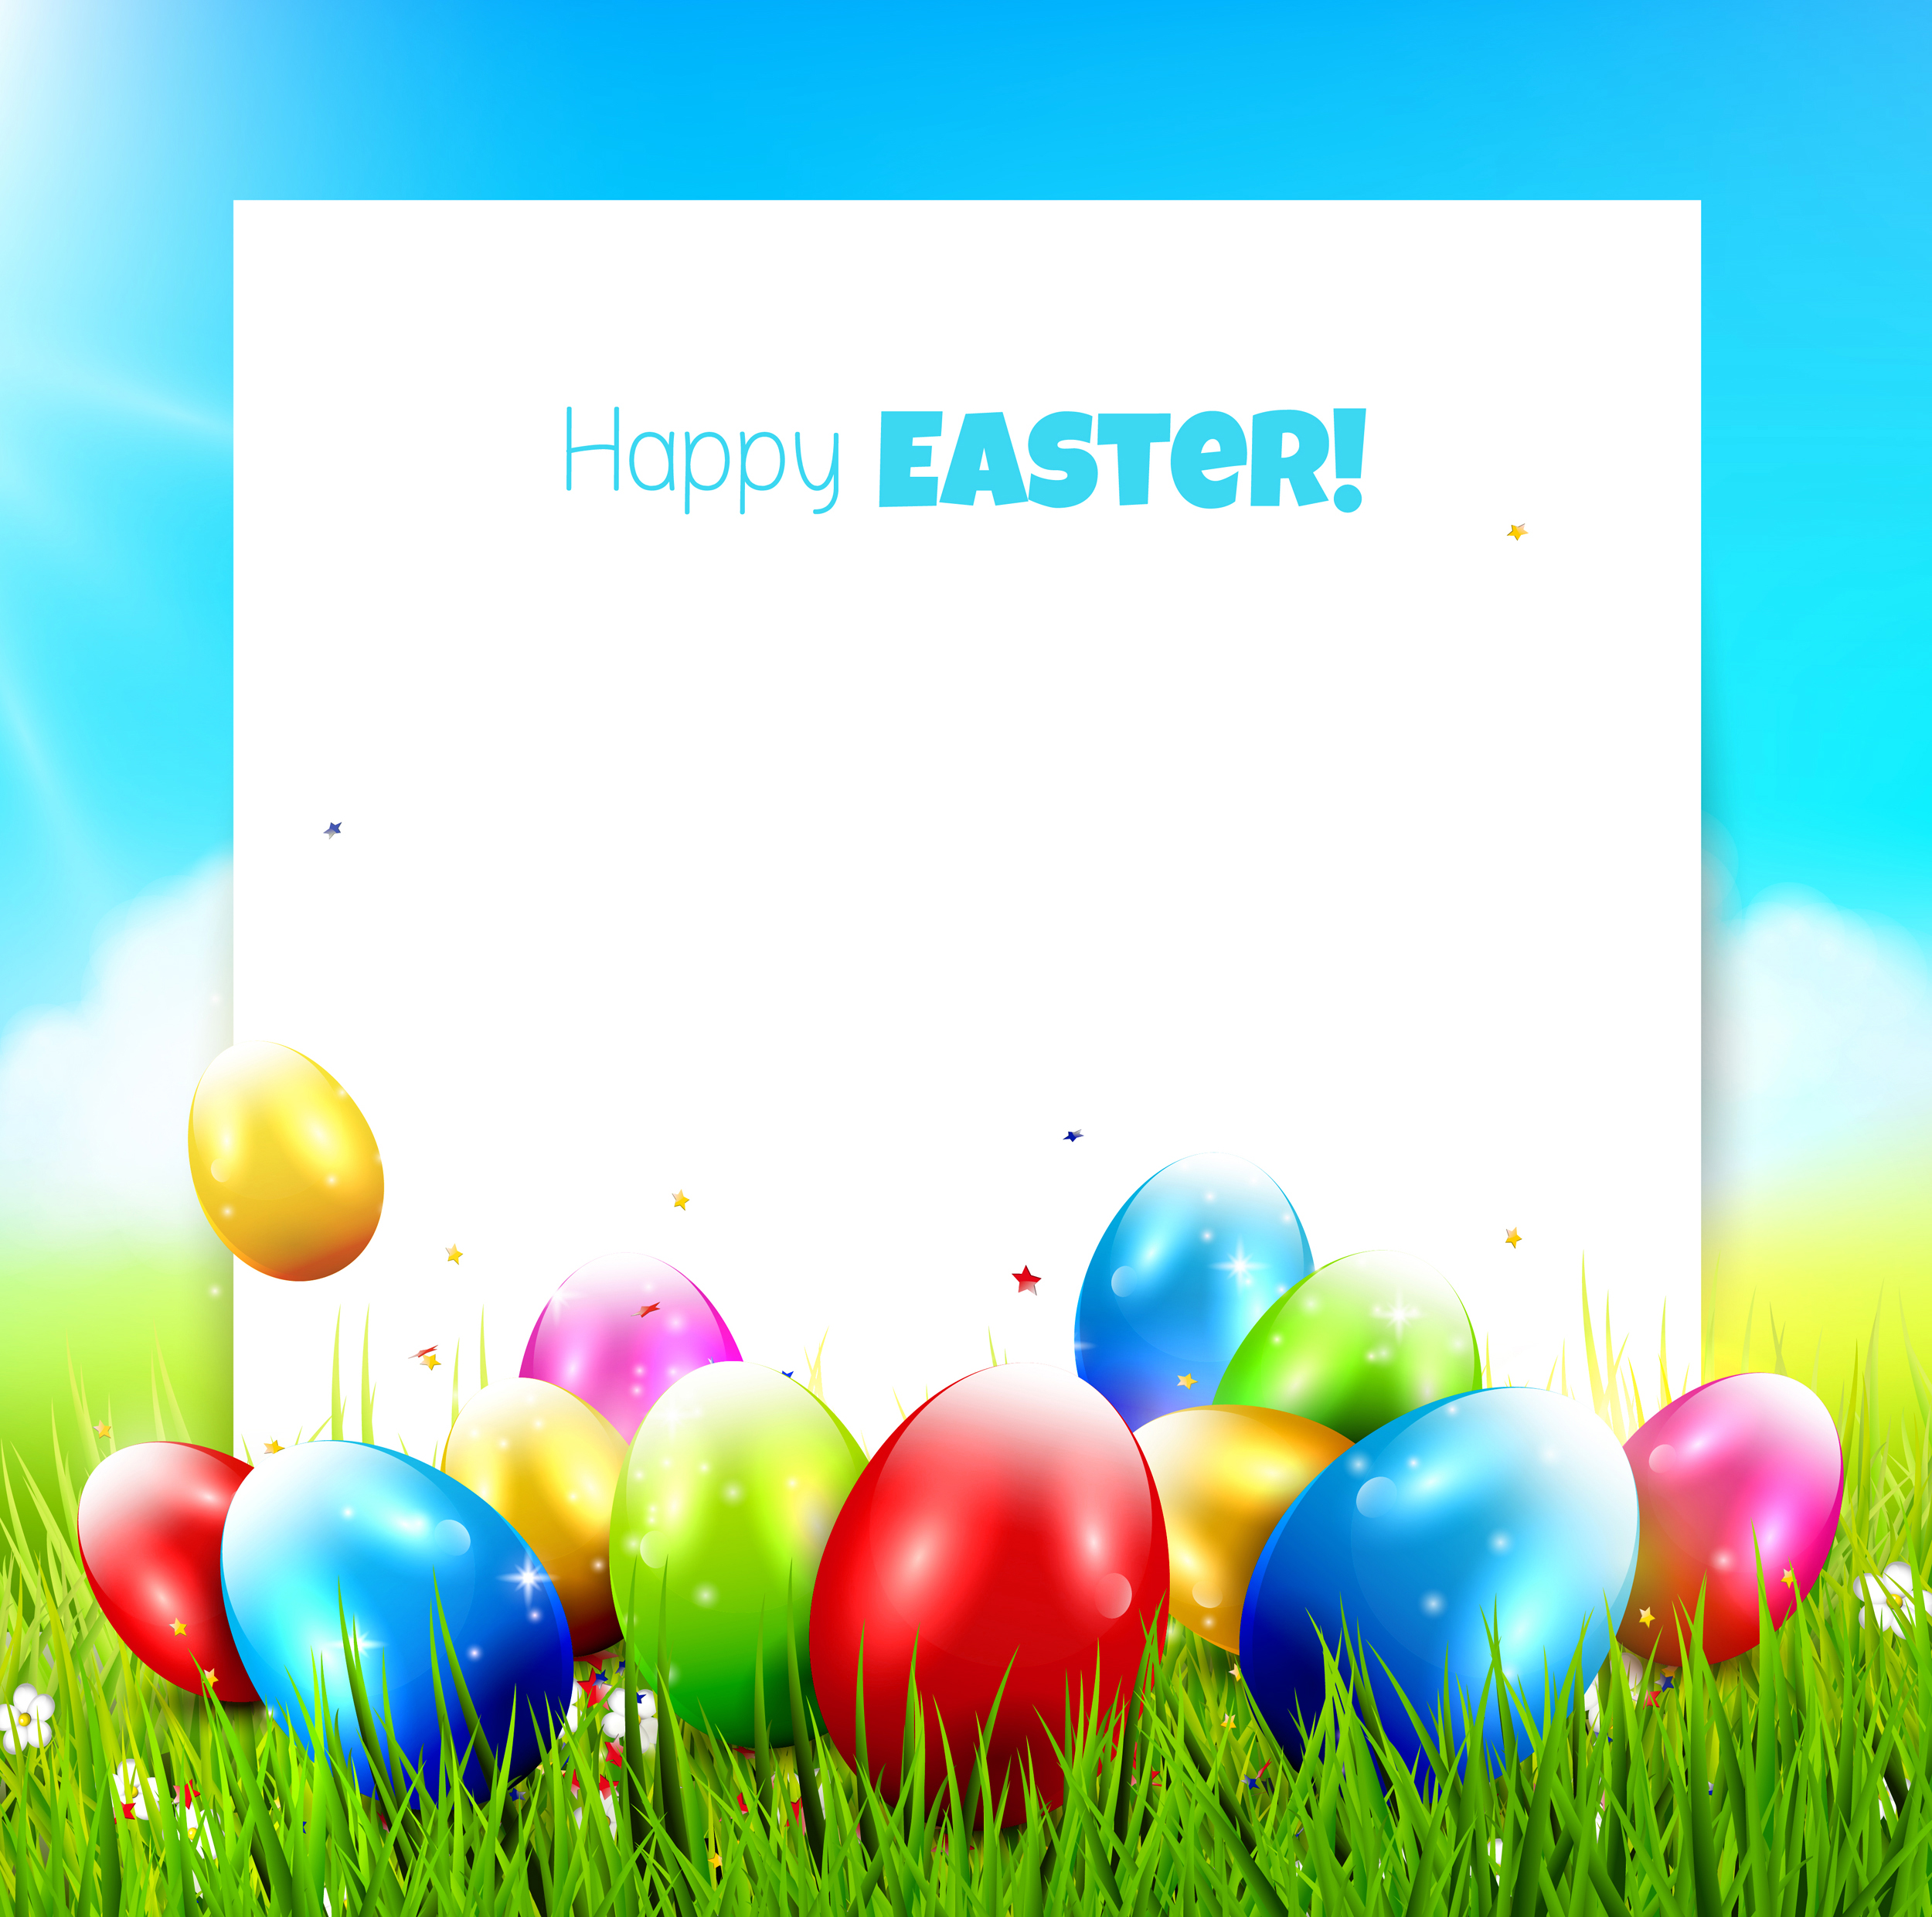 Gallery For Gt Easter Background